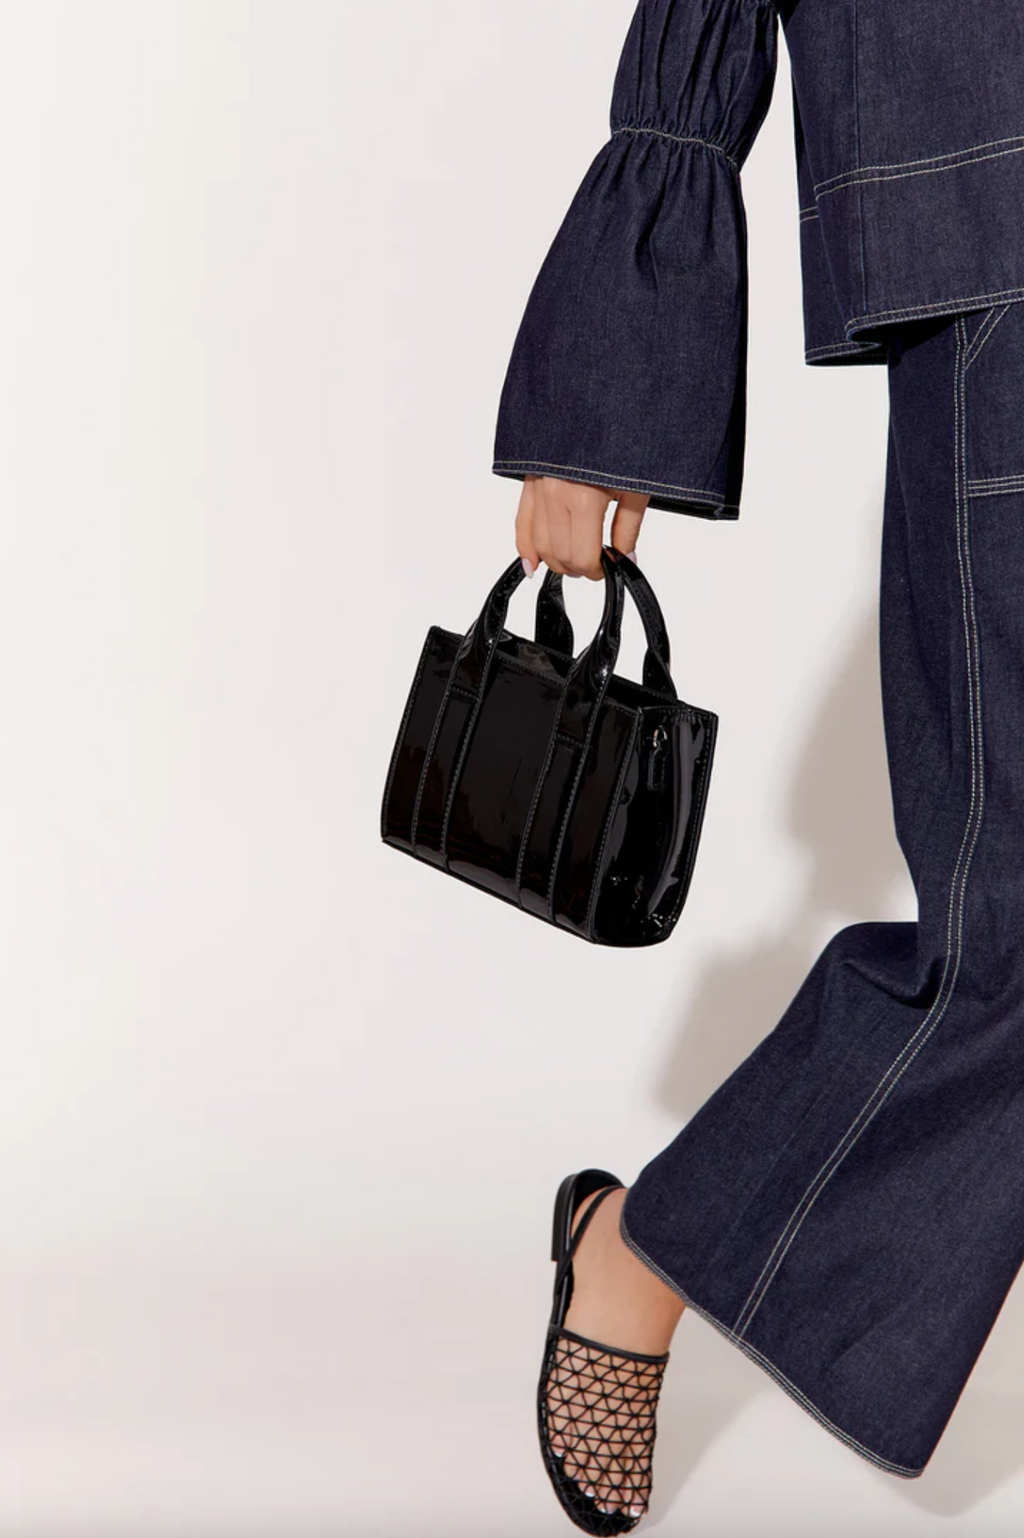 the mallory high shine mini tote by adorne is the perfect black shoulder bag for everyday use